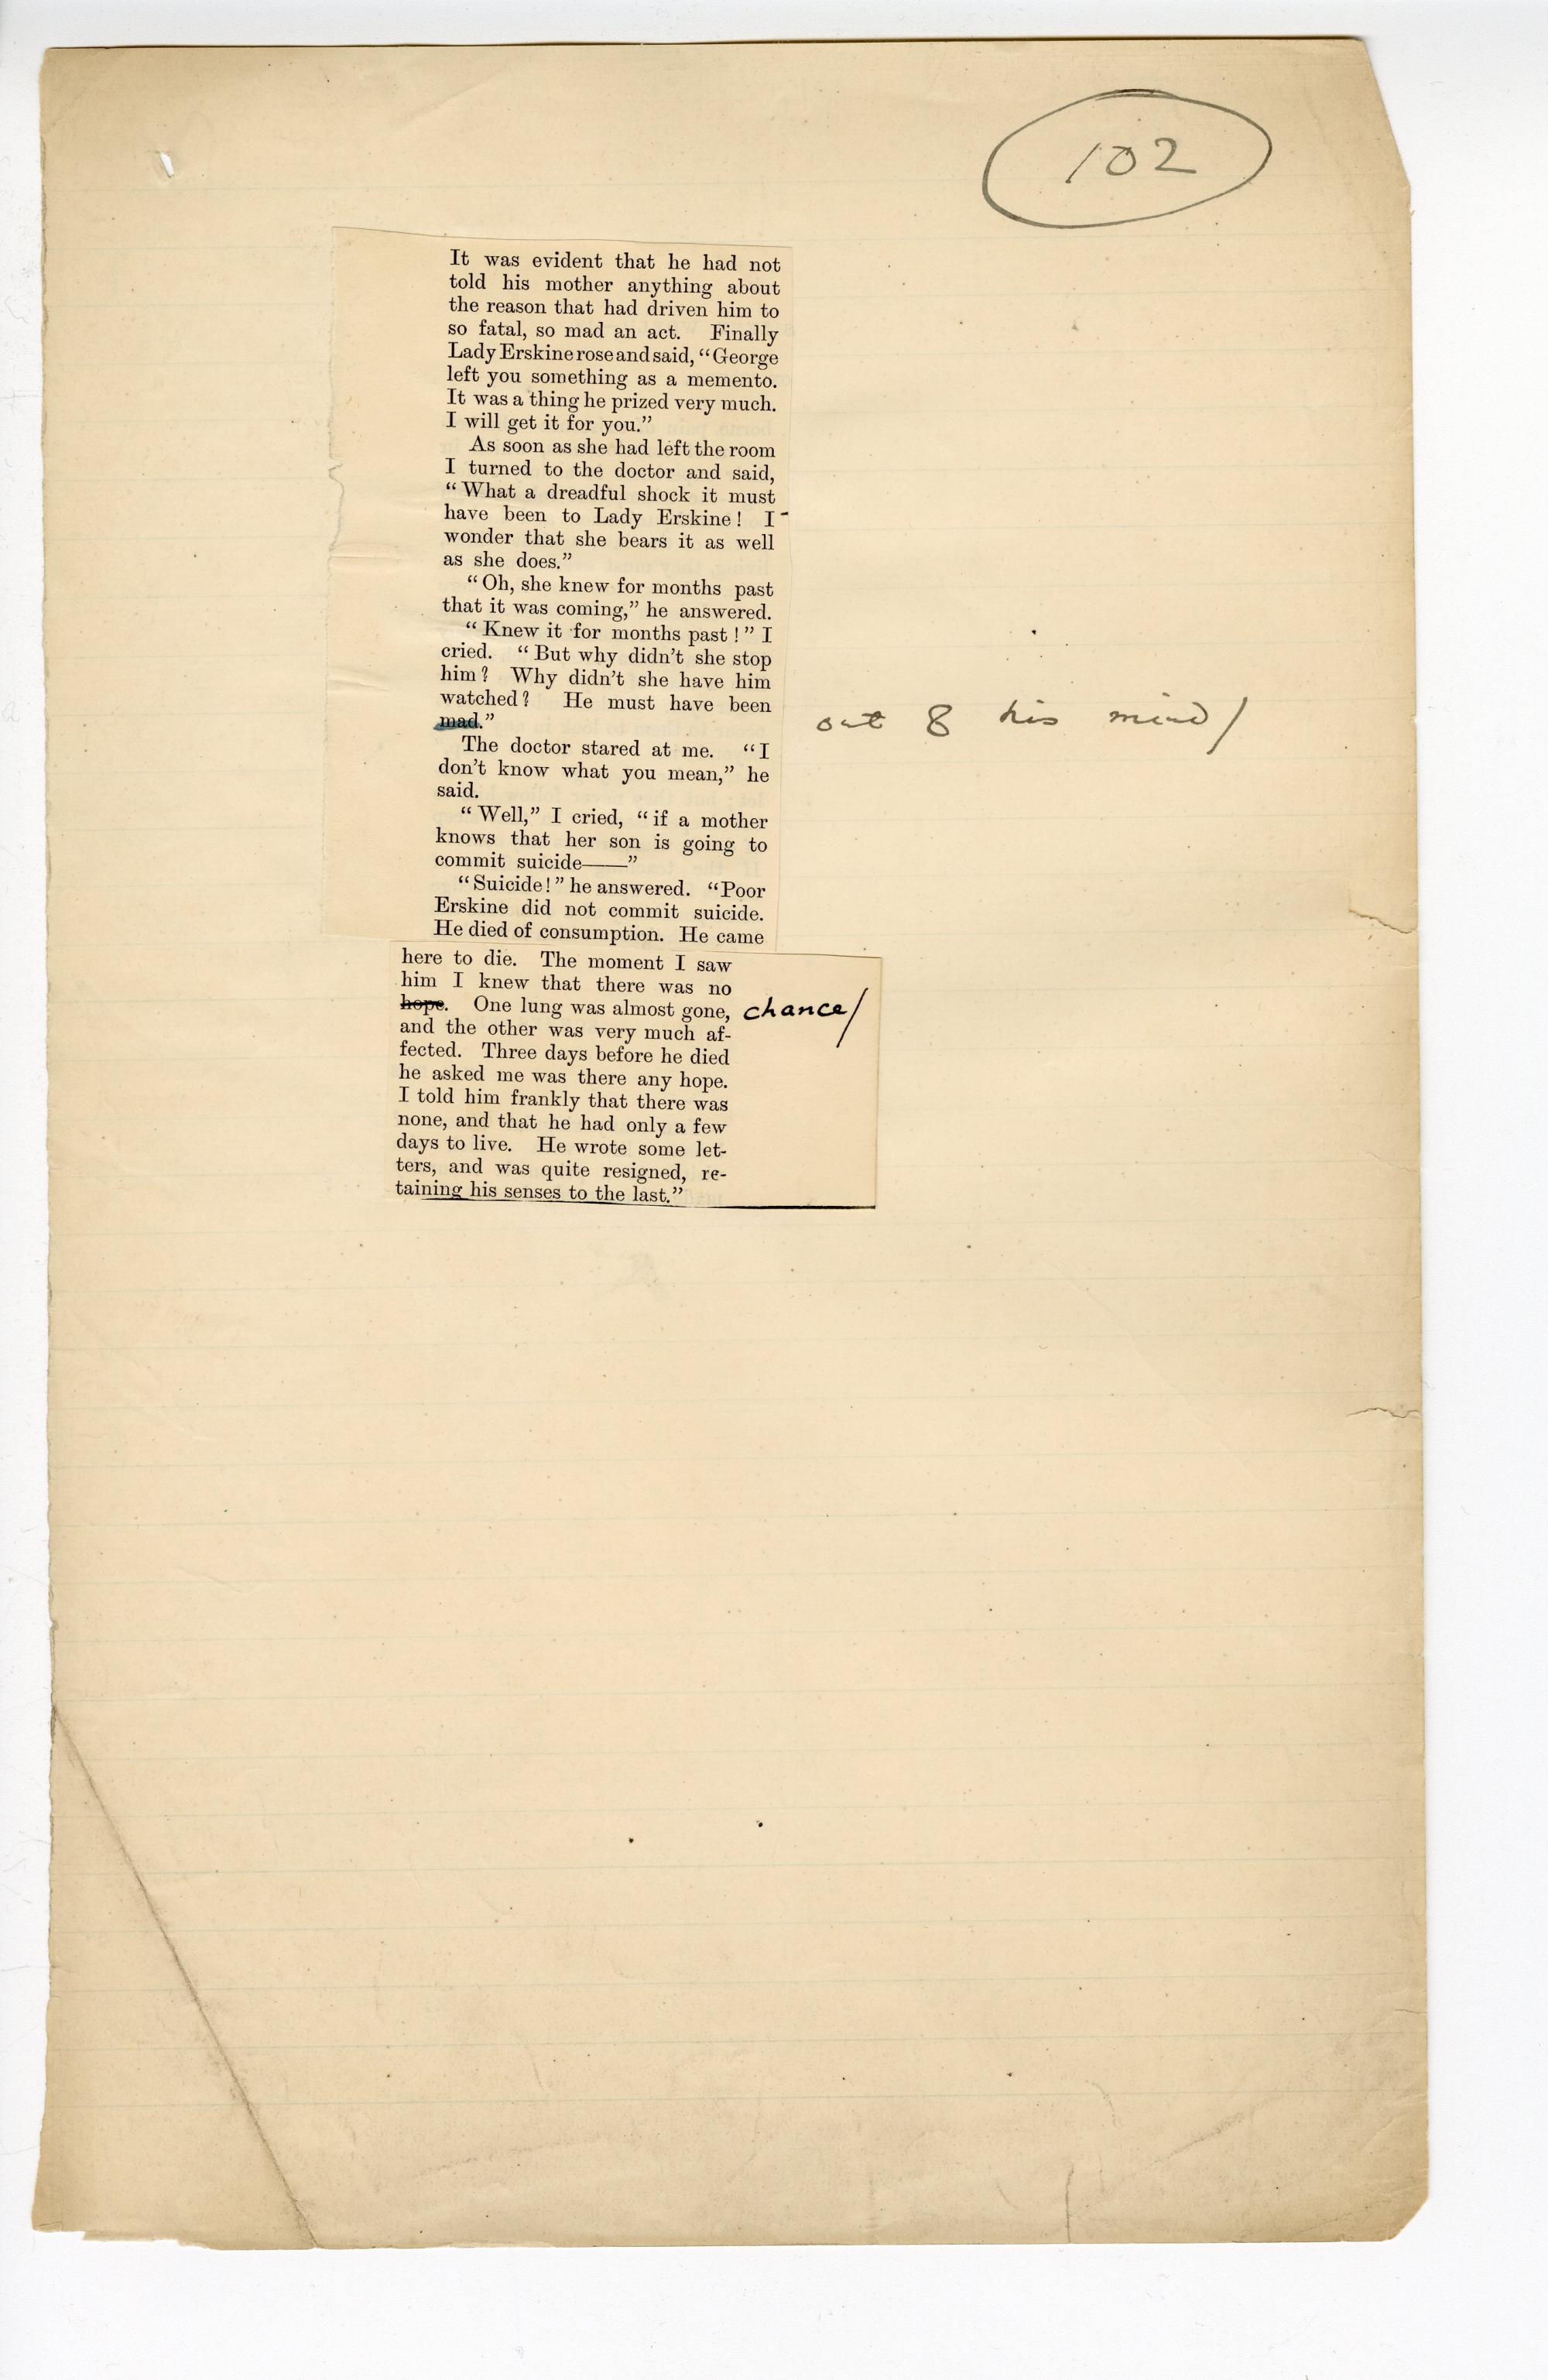 Folio 102 contains two cutouts from p. 21 of the Blackwood's 1889 printing glued down into a single column onto a notebook page. Wilde makes annotations on the Blackwood's cutouts and on the notebook page.